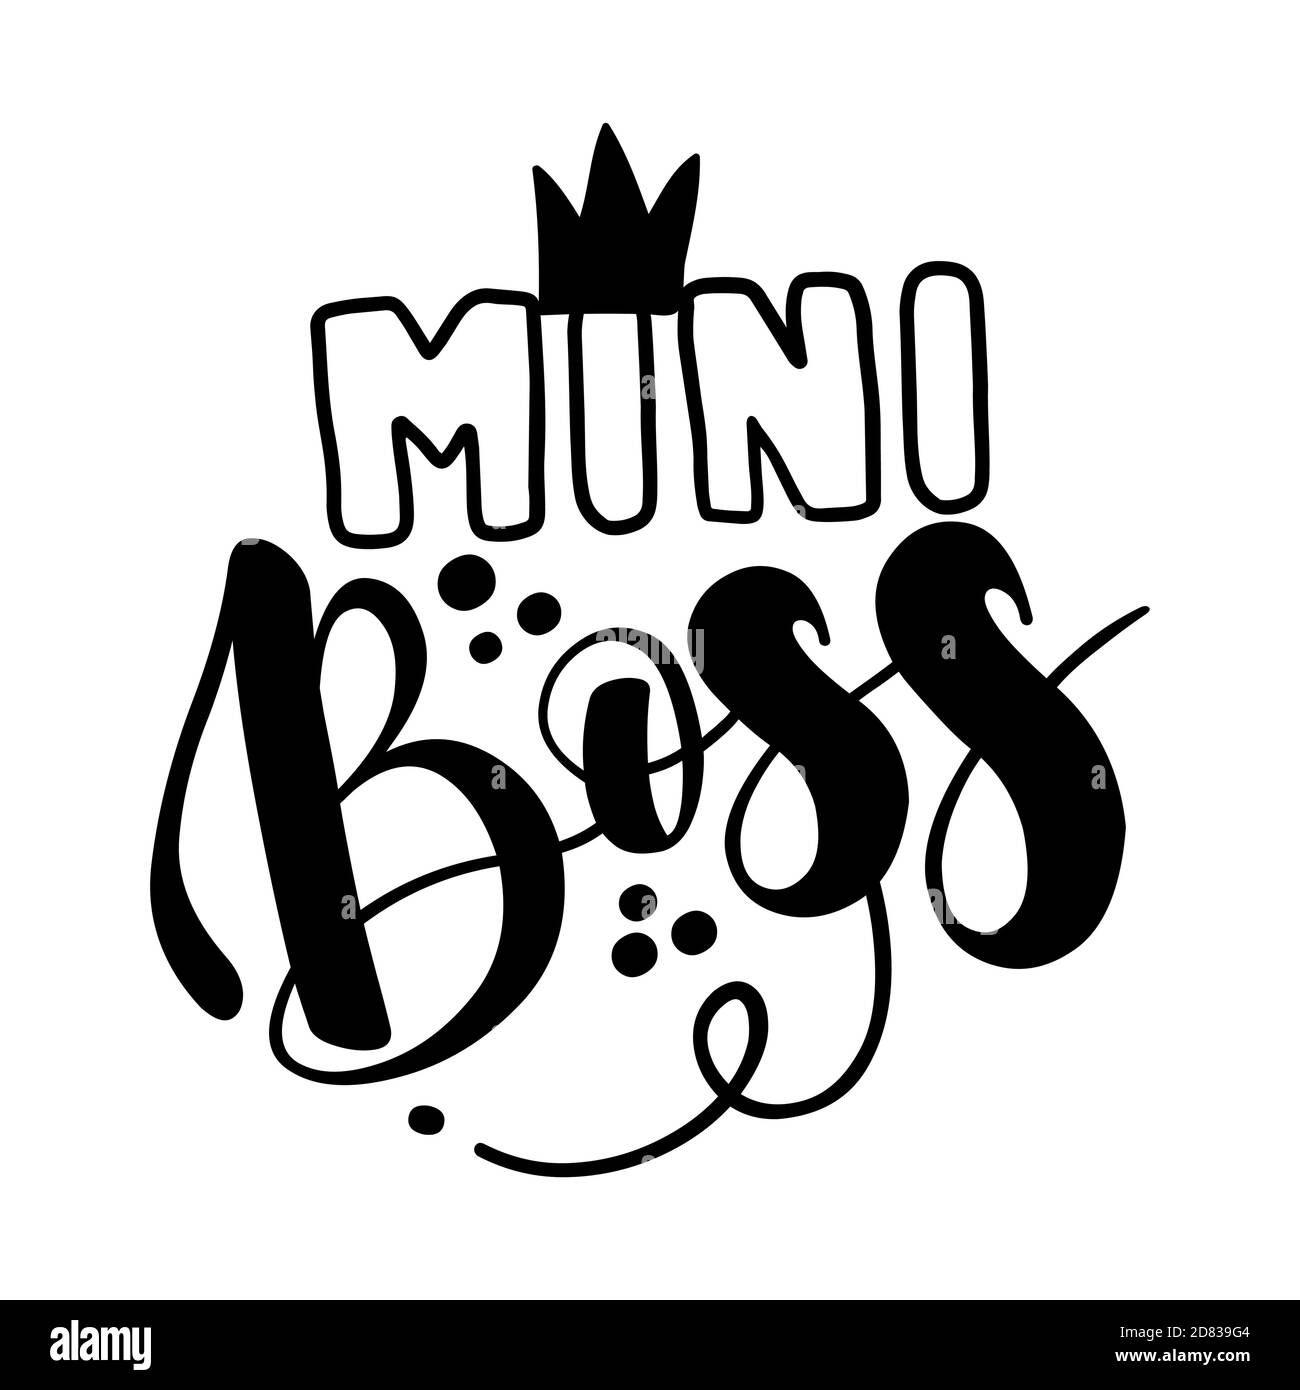 bosses/mini bosses rated based on how interesting they are to